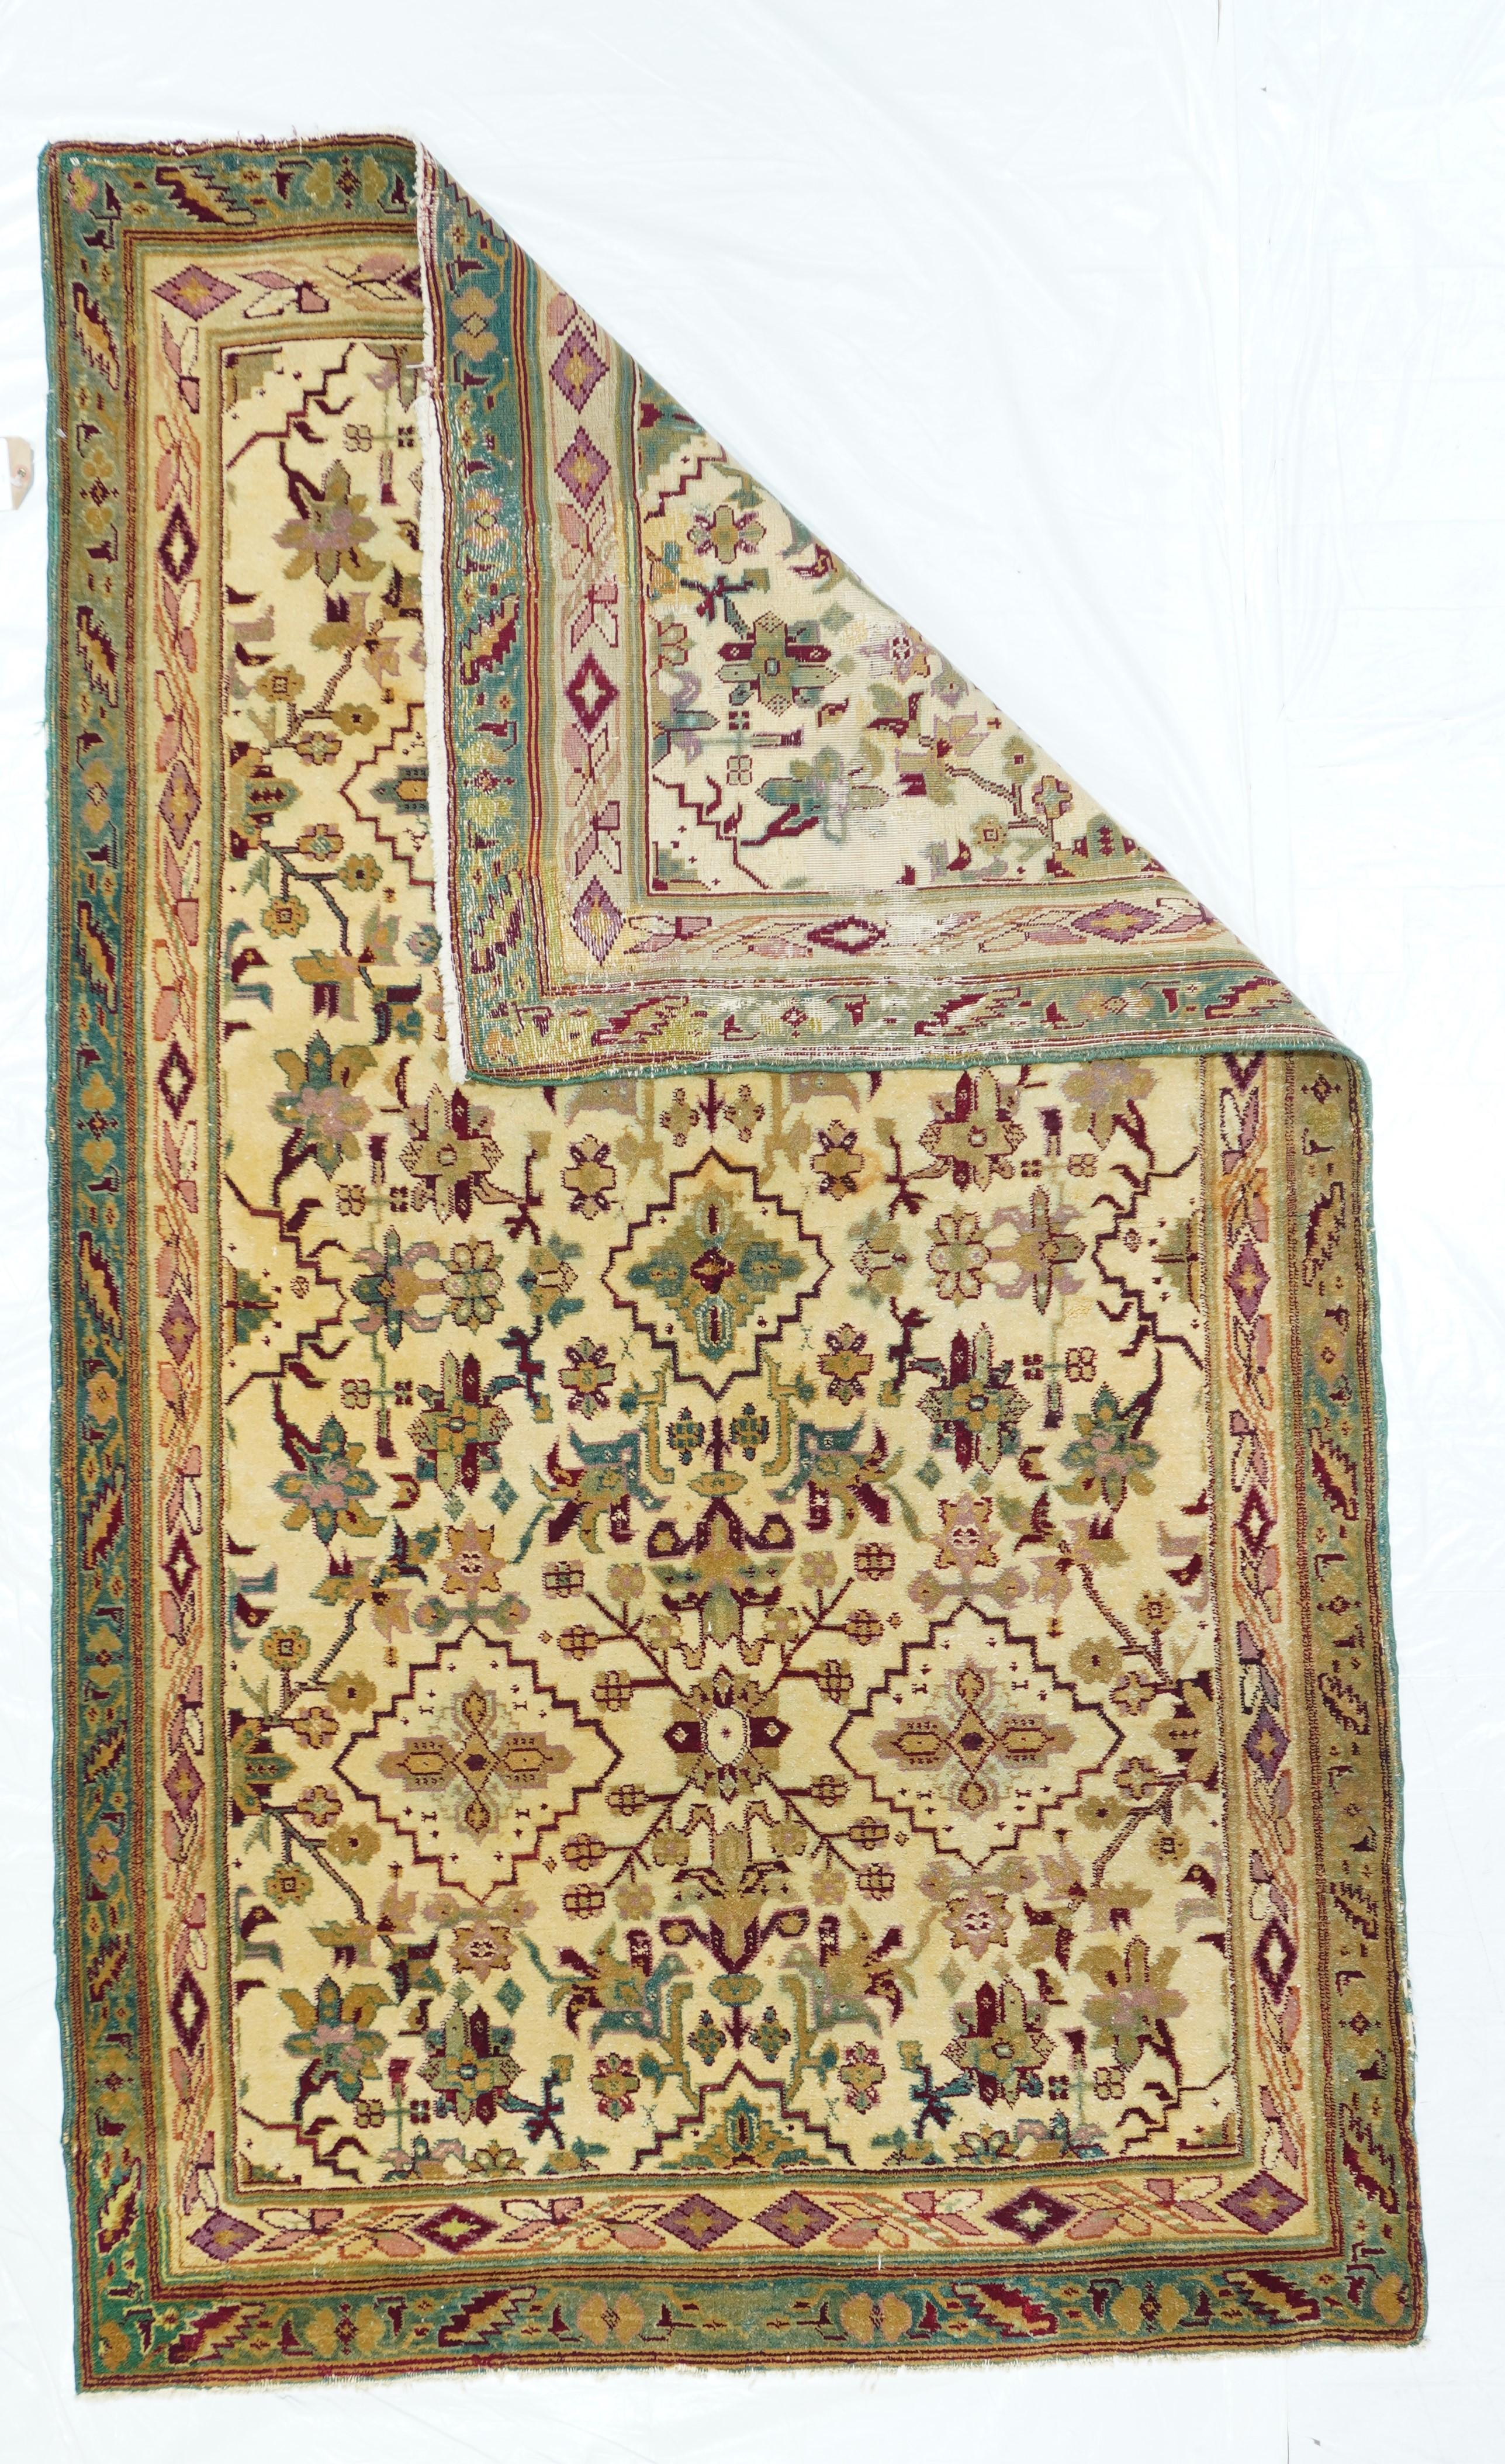 Antique Agra rug 4' x 6'9''. The northern city of Agra was once the capital of the Mughal Empire and has been weaving high quality rugs in all formats and sizes for a varied clientele, both within India and as an export item, for centuries. The